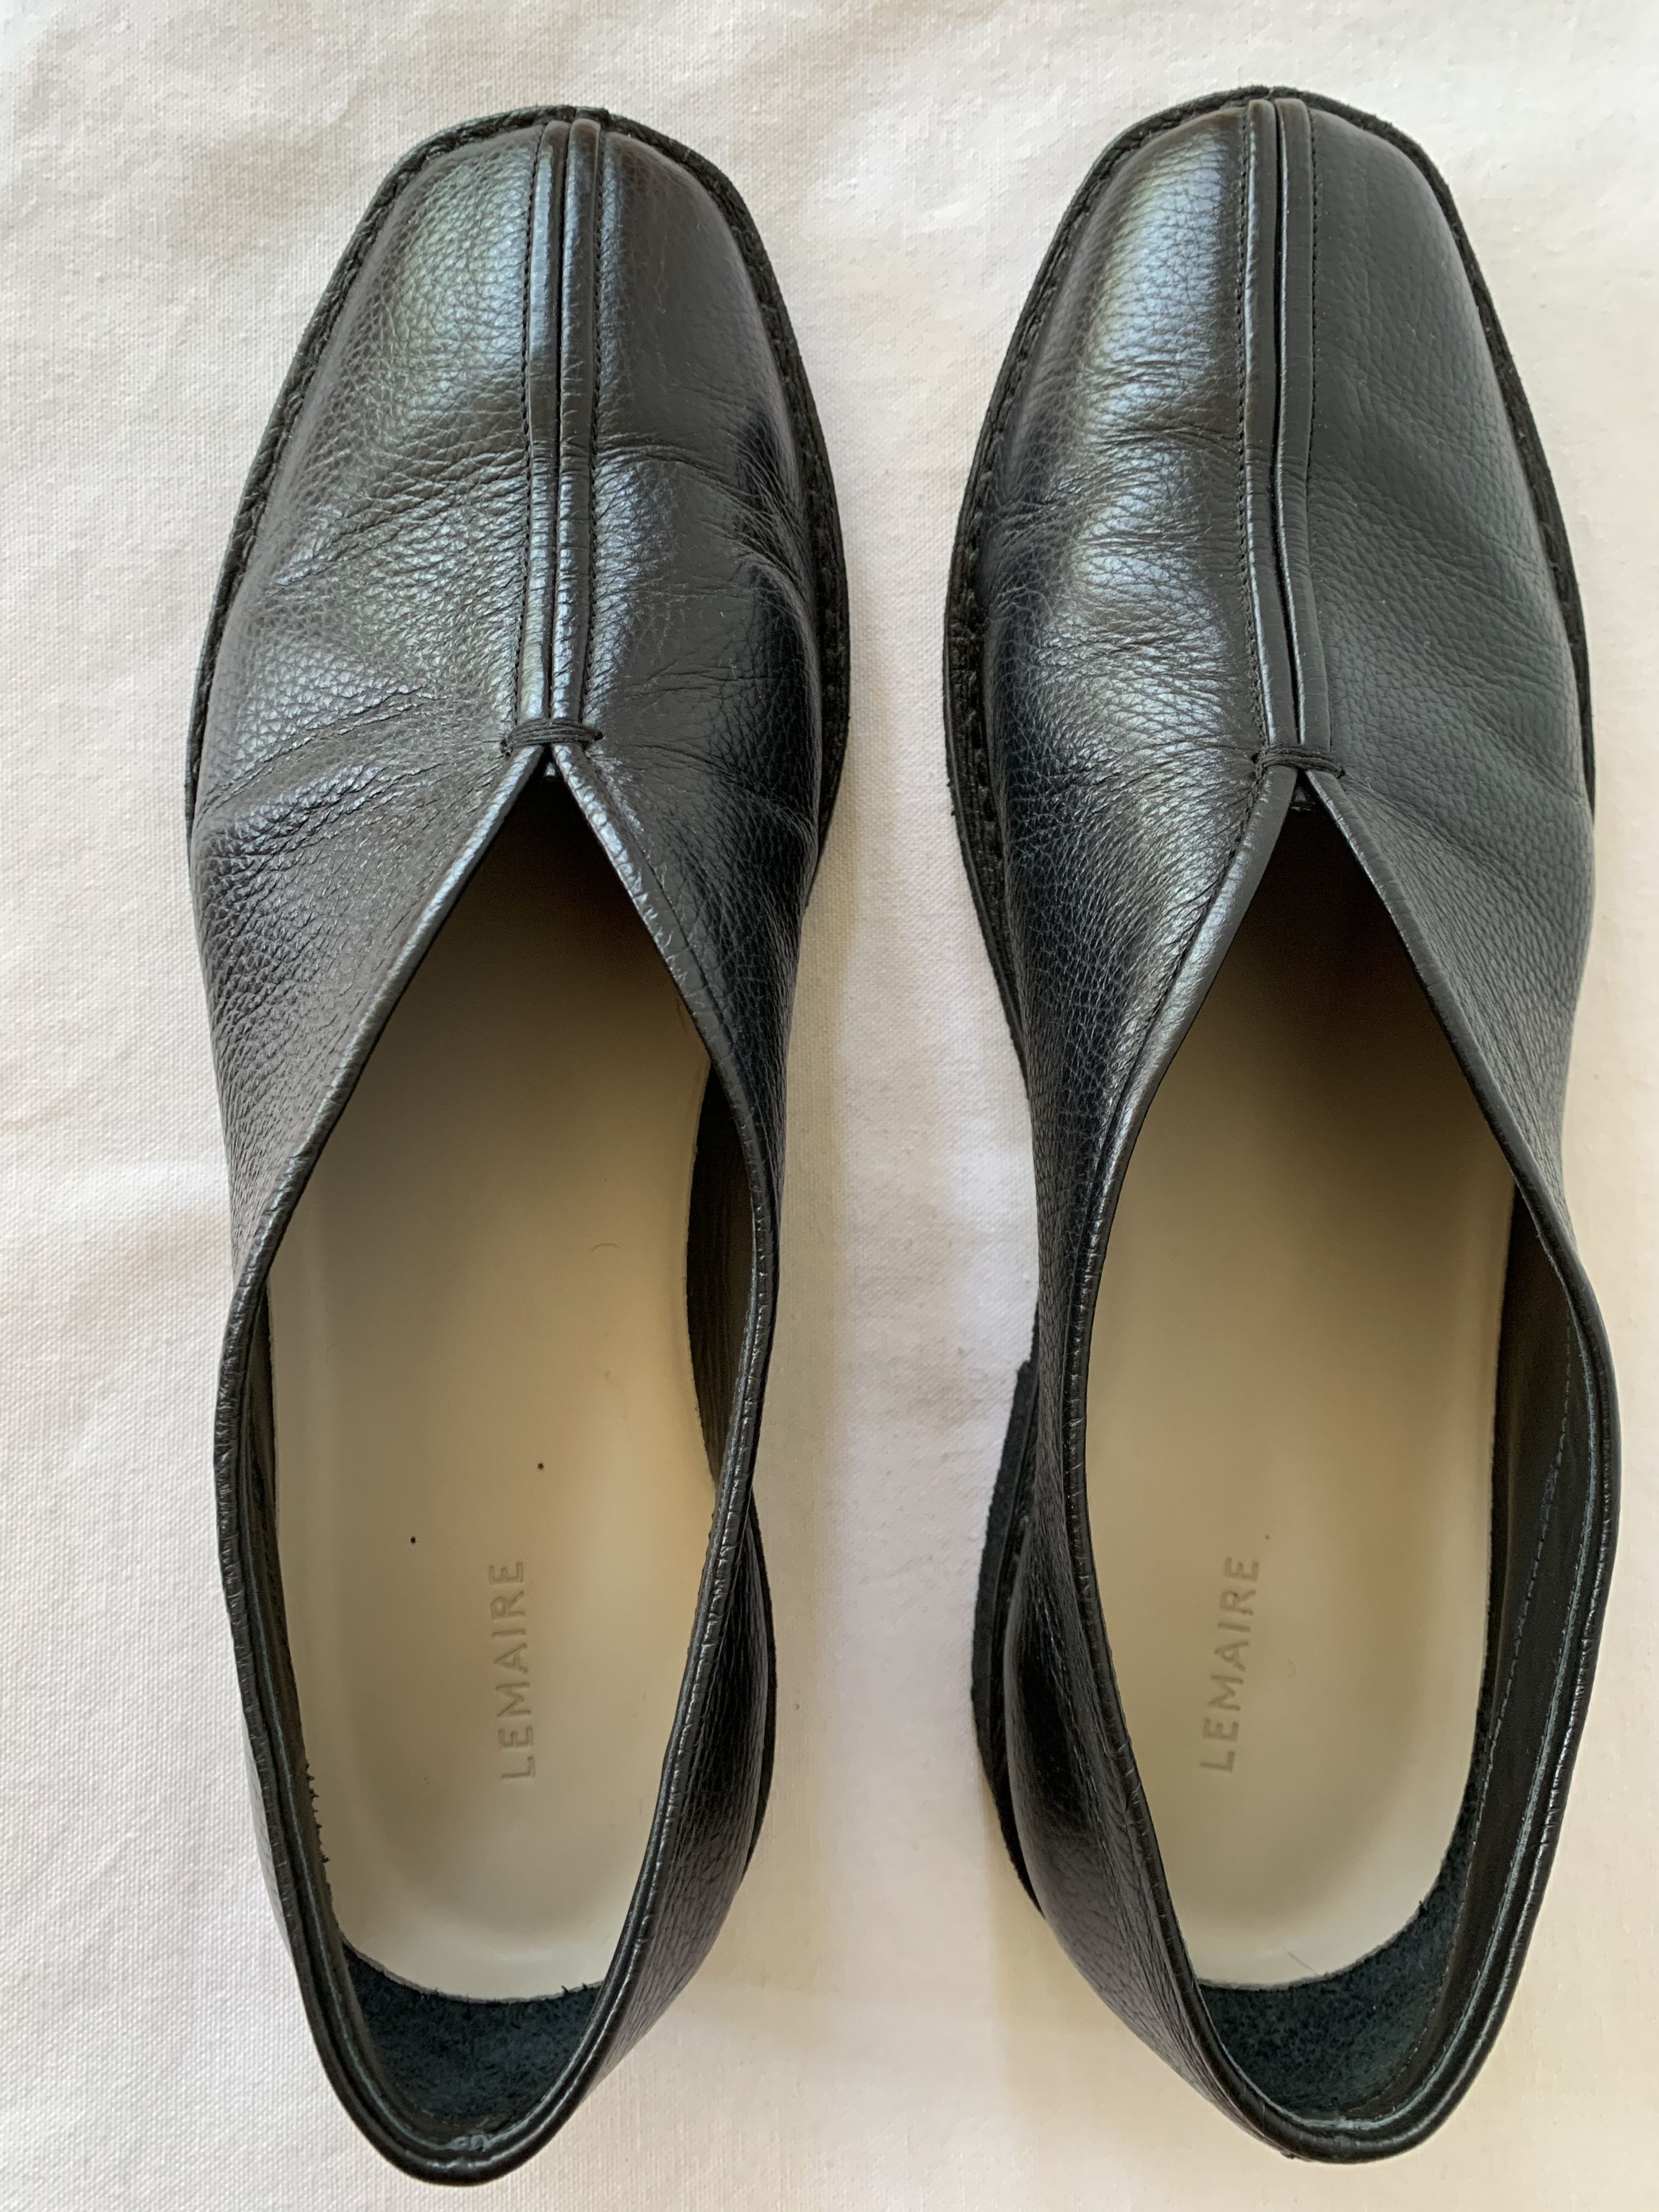 Lemaire Lemaire Chinese Slippers Black Leather Loafers Sz 45 Size US 12 / EU 45 - 5 Thumbnail